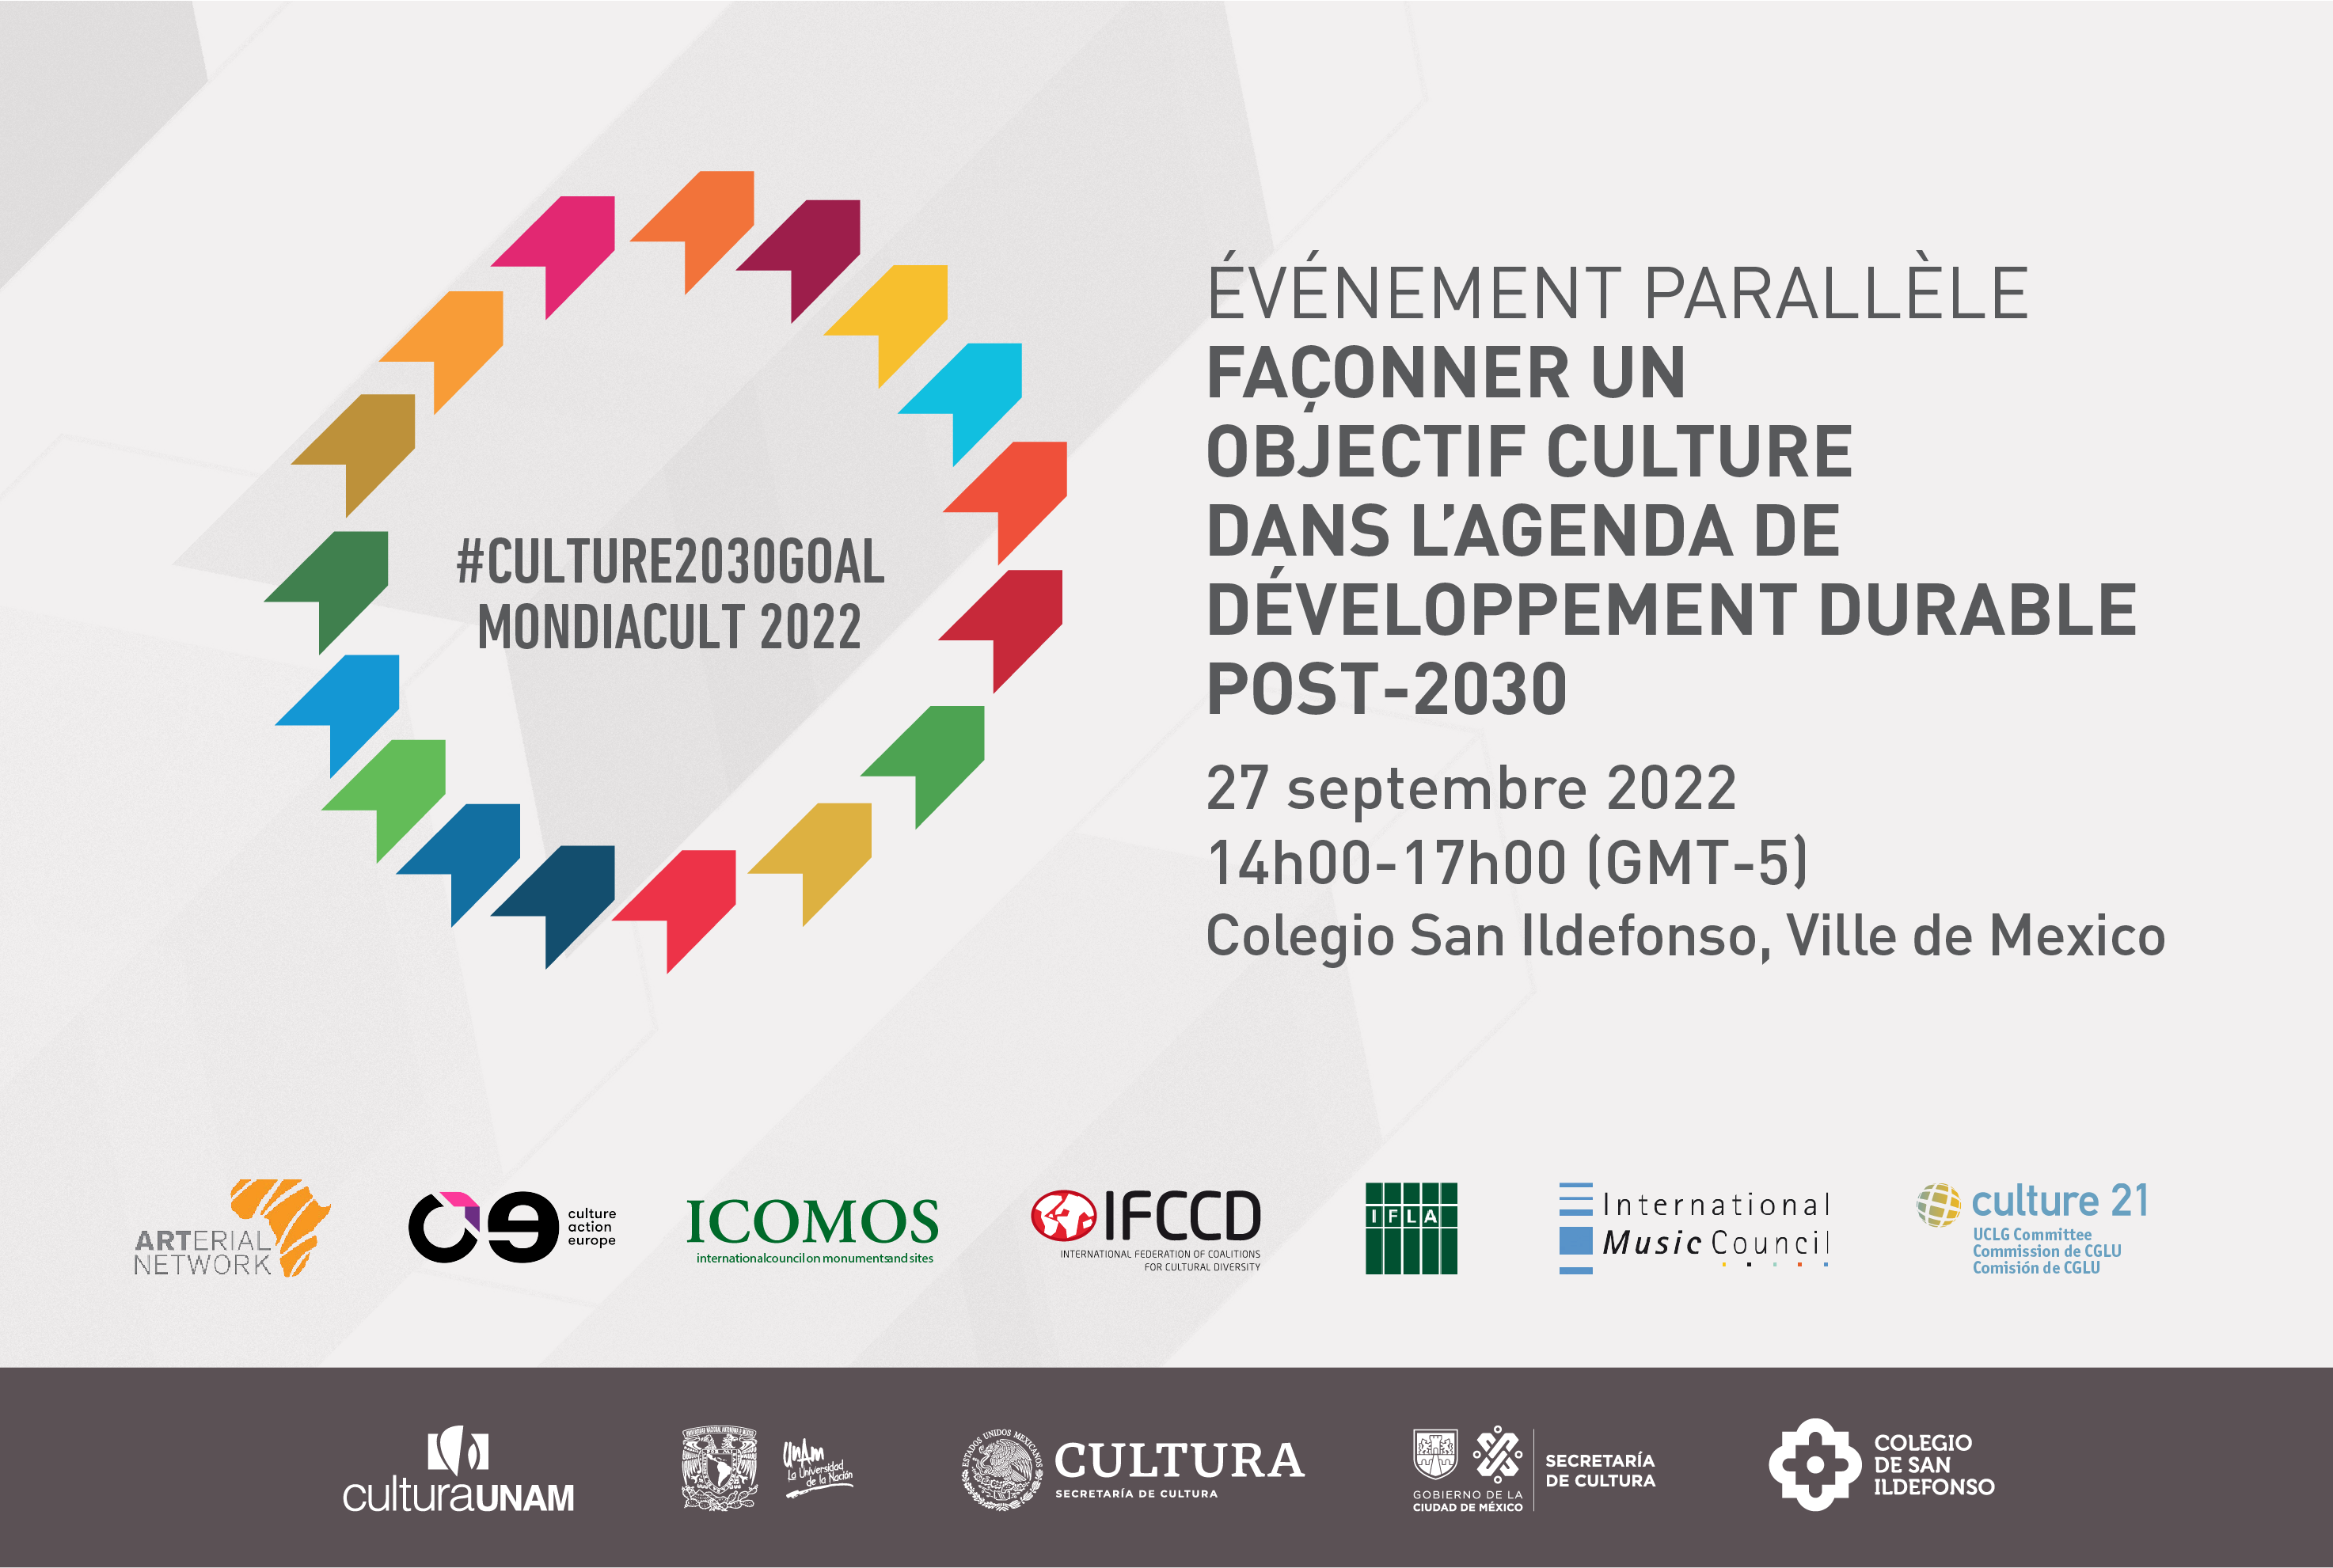 banner of culture 2030 goal with logo and text about event